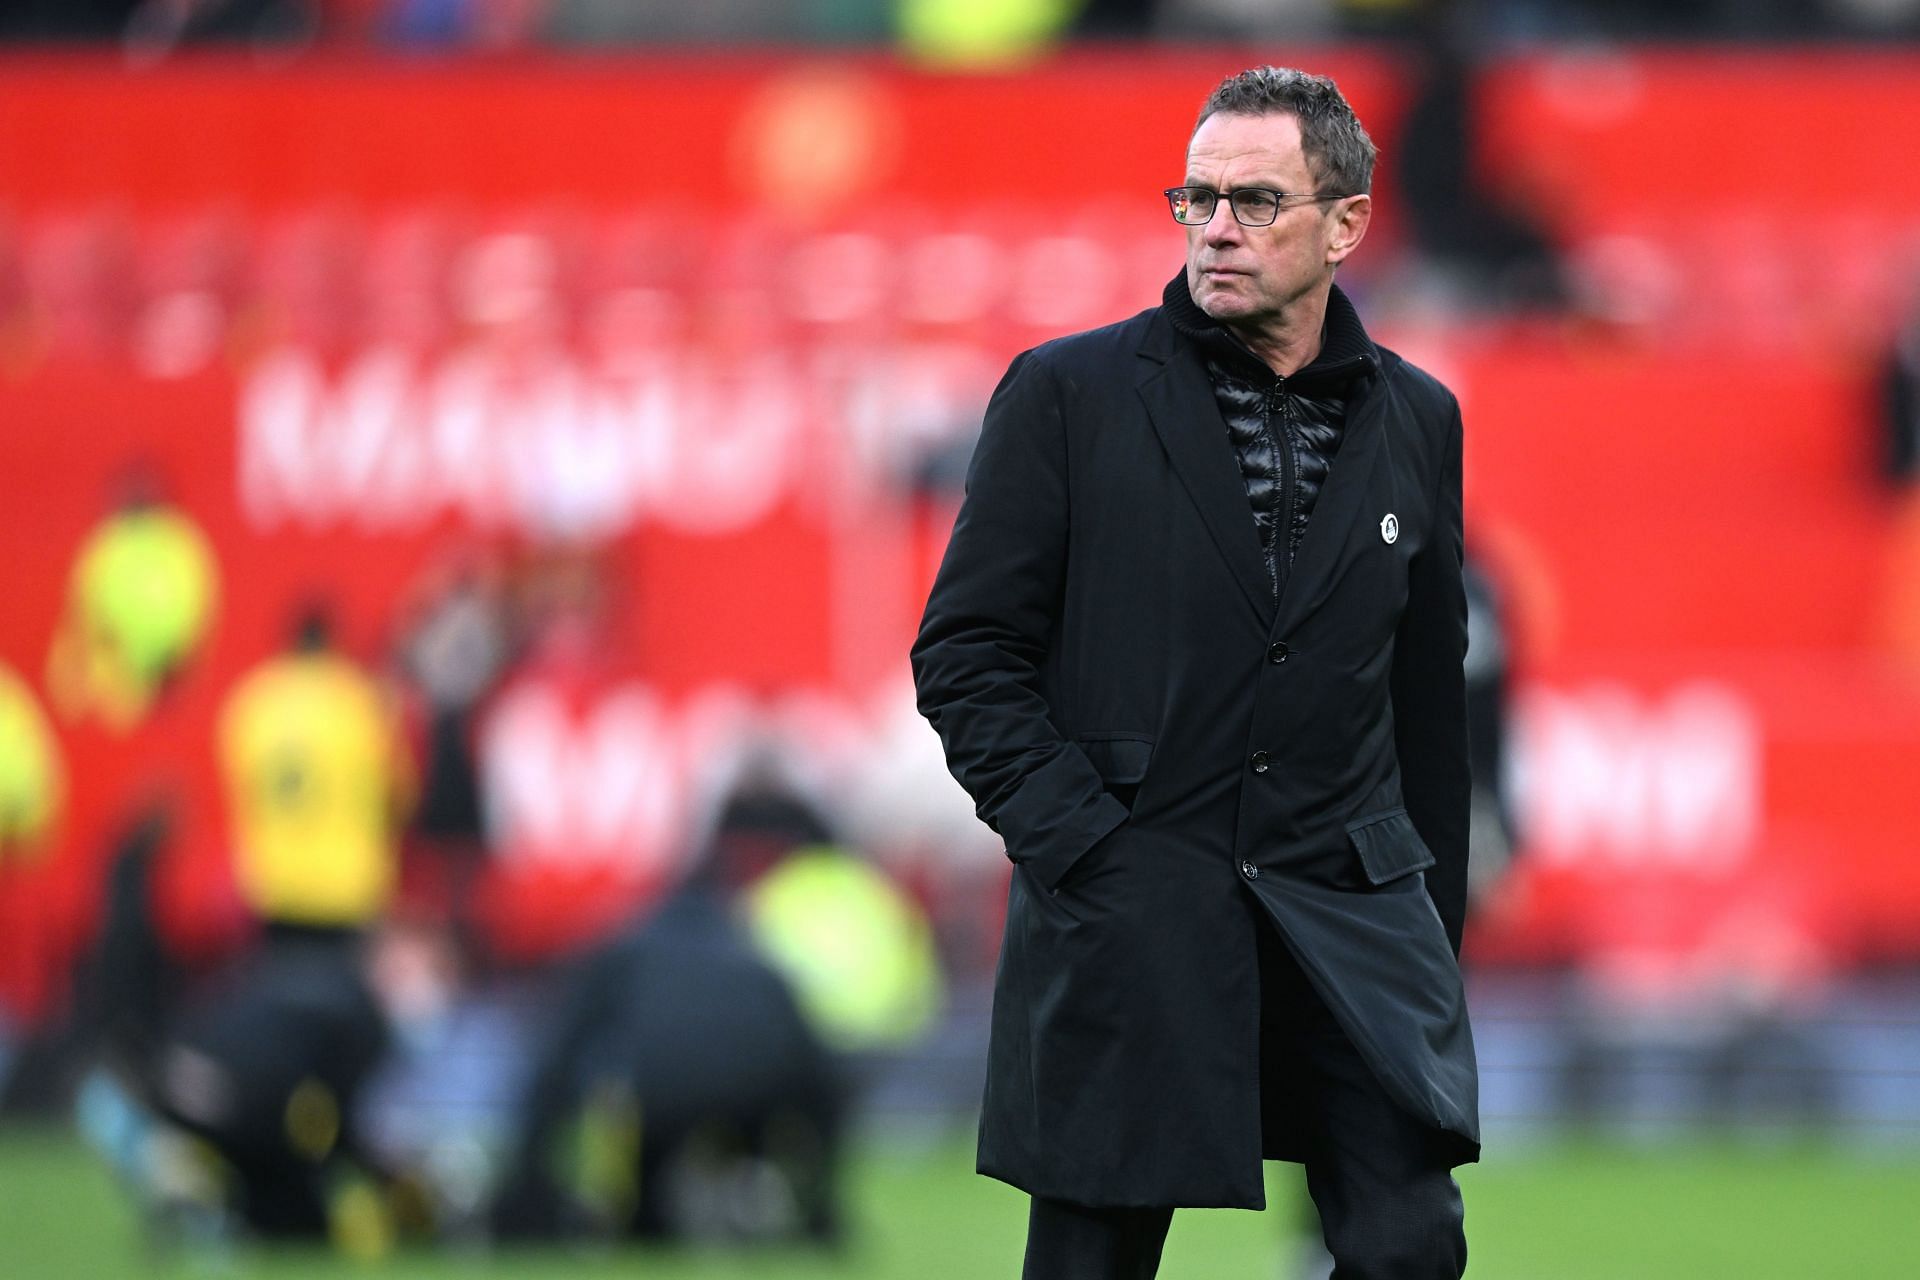 Interim Manchester United manager Ralf Rangnick will move upstairs at the end of the season.